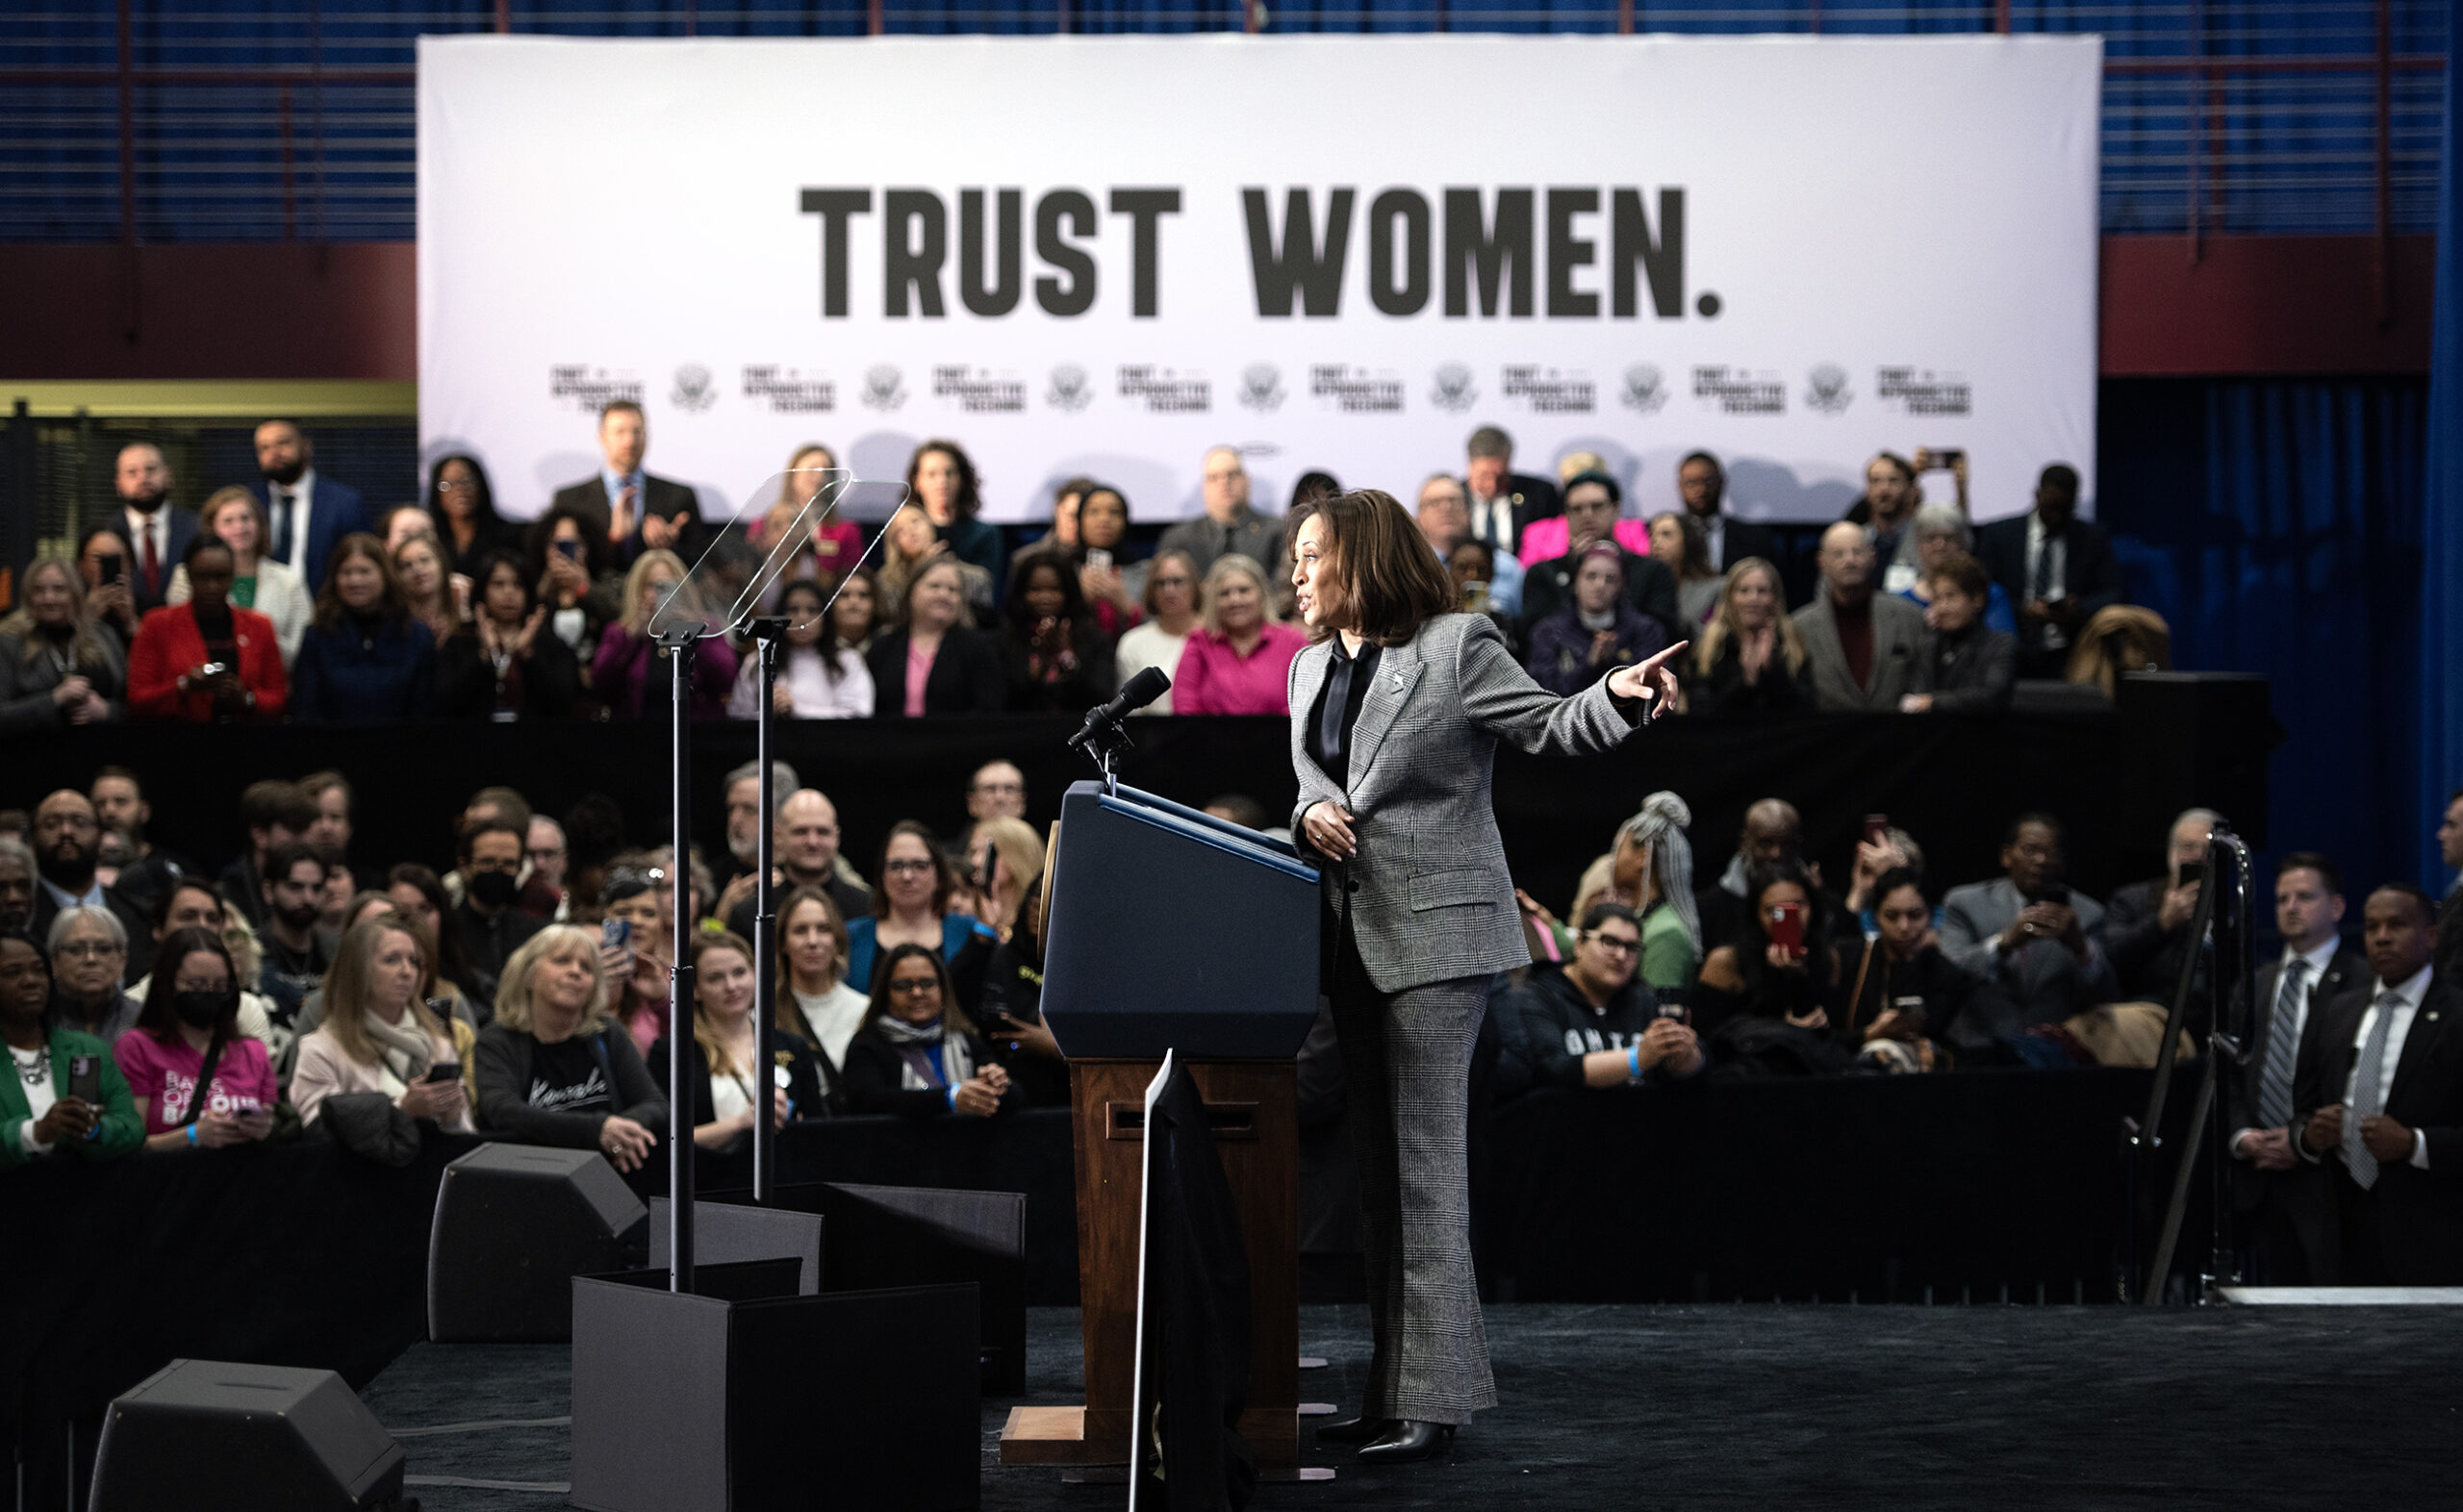 VP Harris points backward as she stands in front of a crowd & a banner that says "TRUST WOMEN."